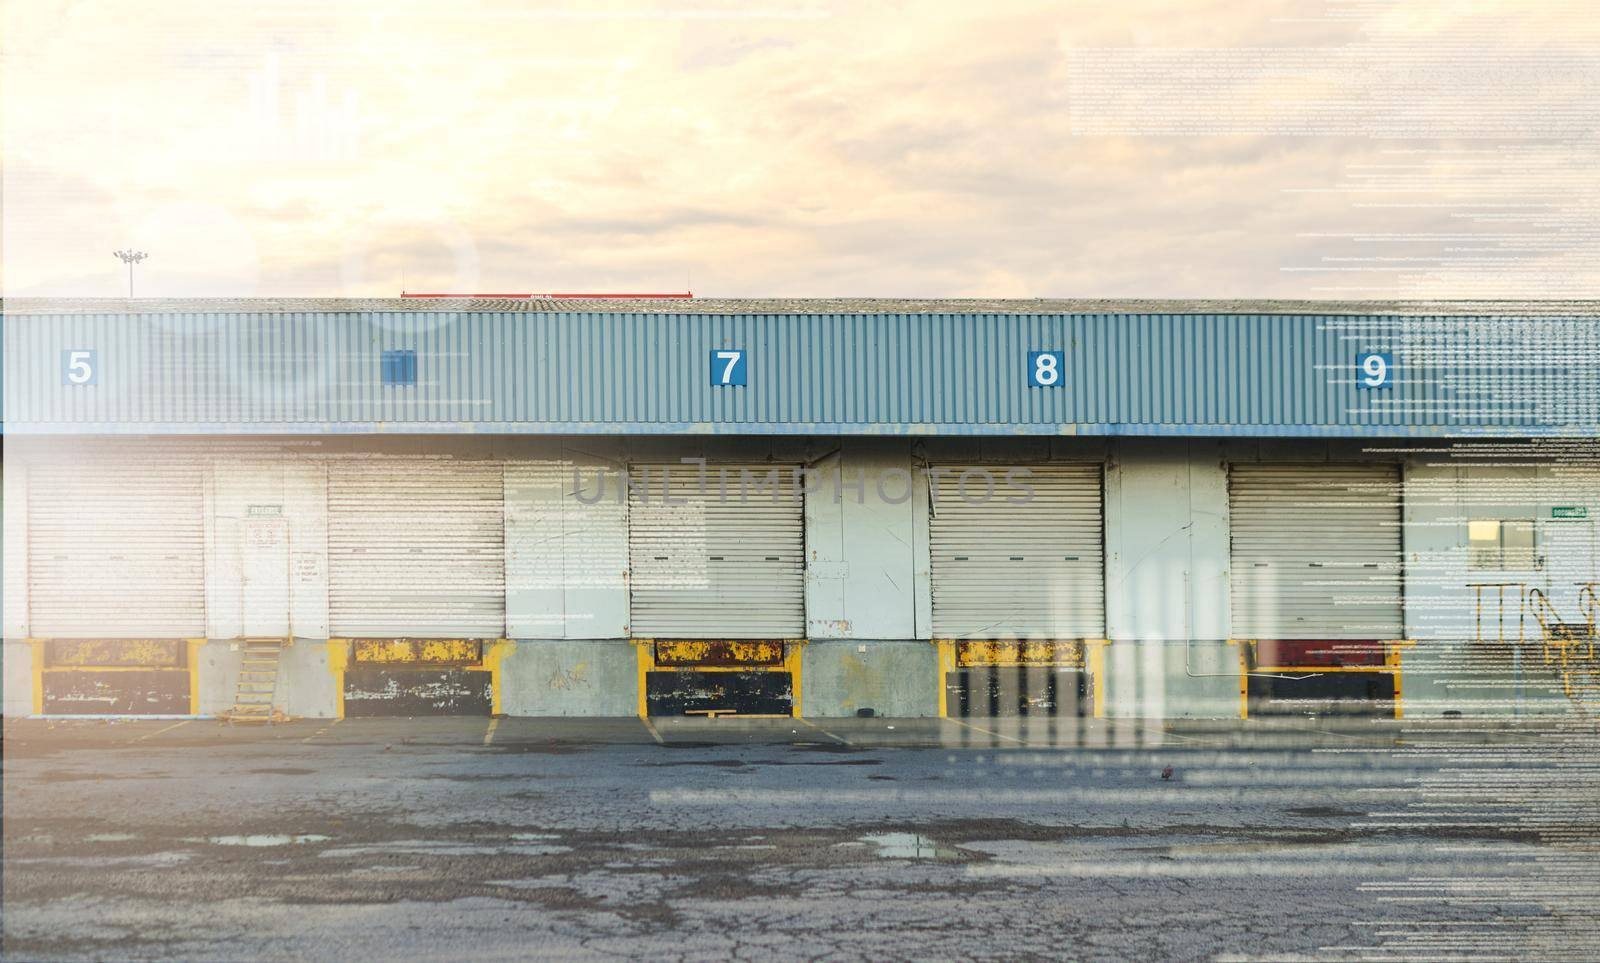 Empty logistics, industrial and cargo shipping site for product distribution, dispatch and storage. Supply chain warehouse, commercial building and loading bay garage door for export freight delivery.